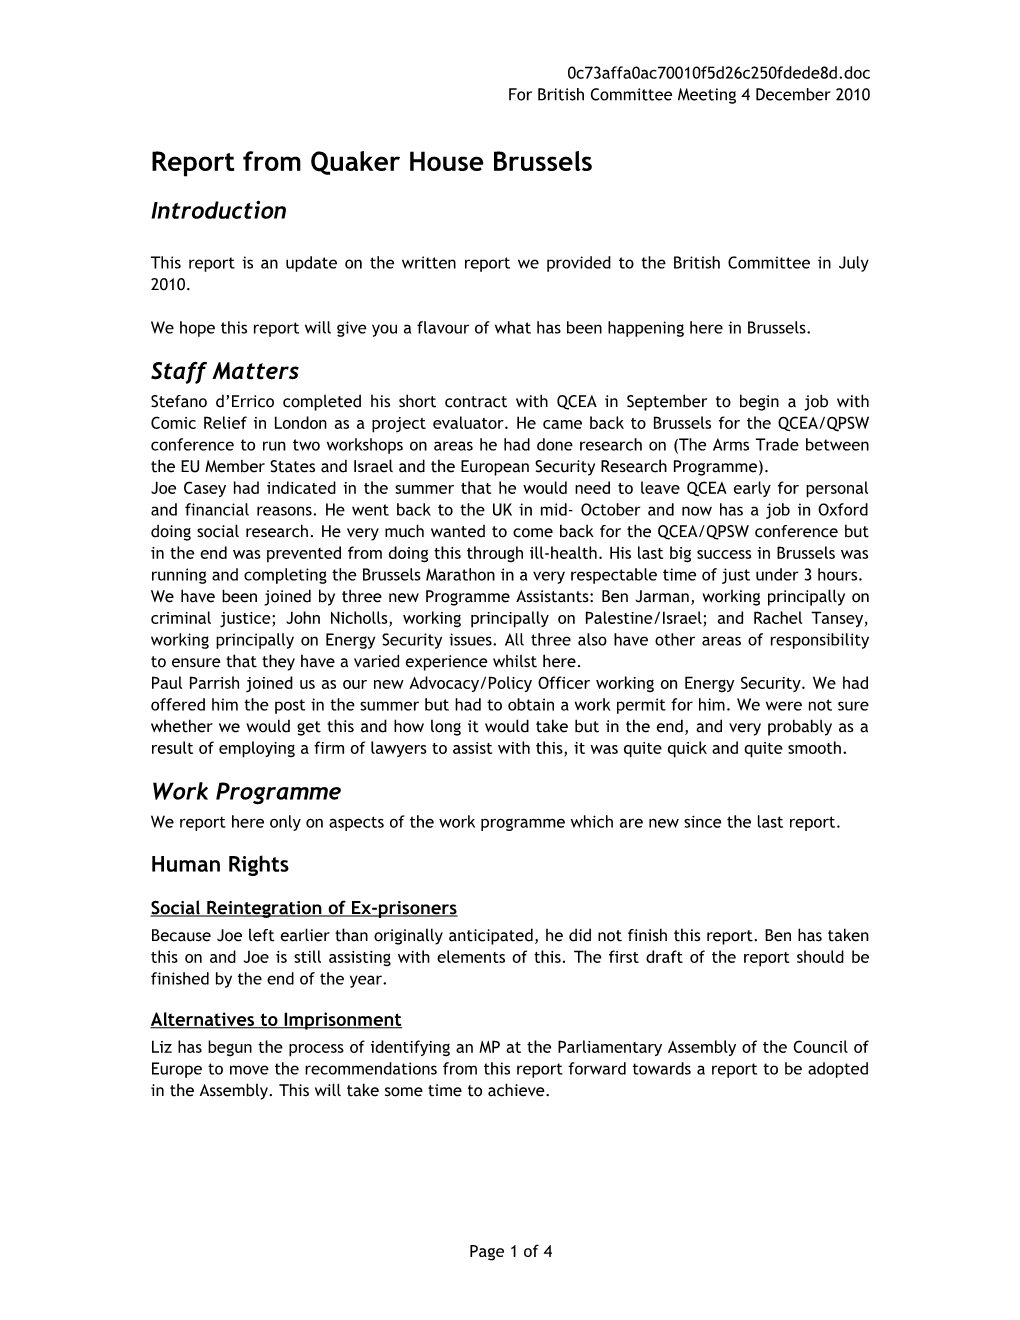 Report from Quaker House Brussels